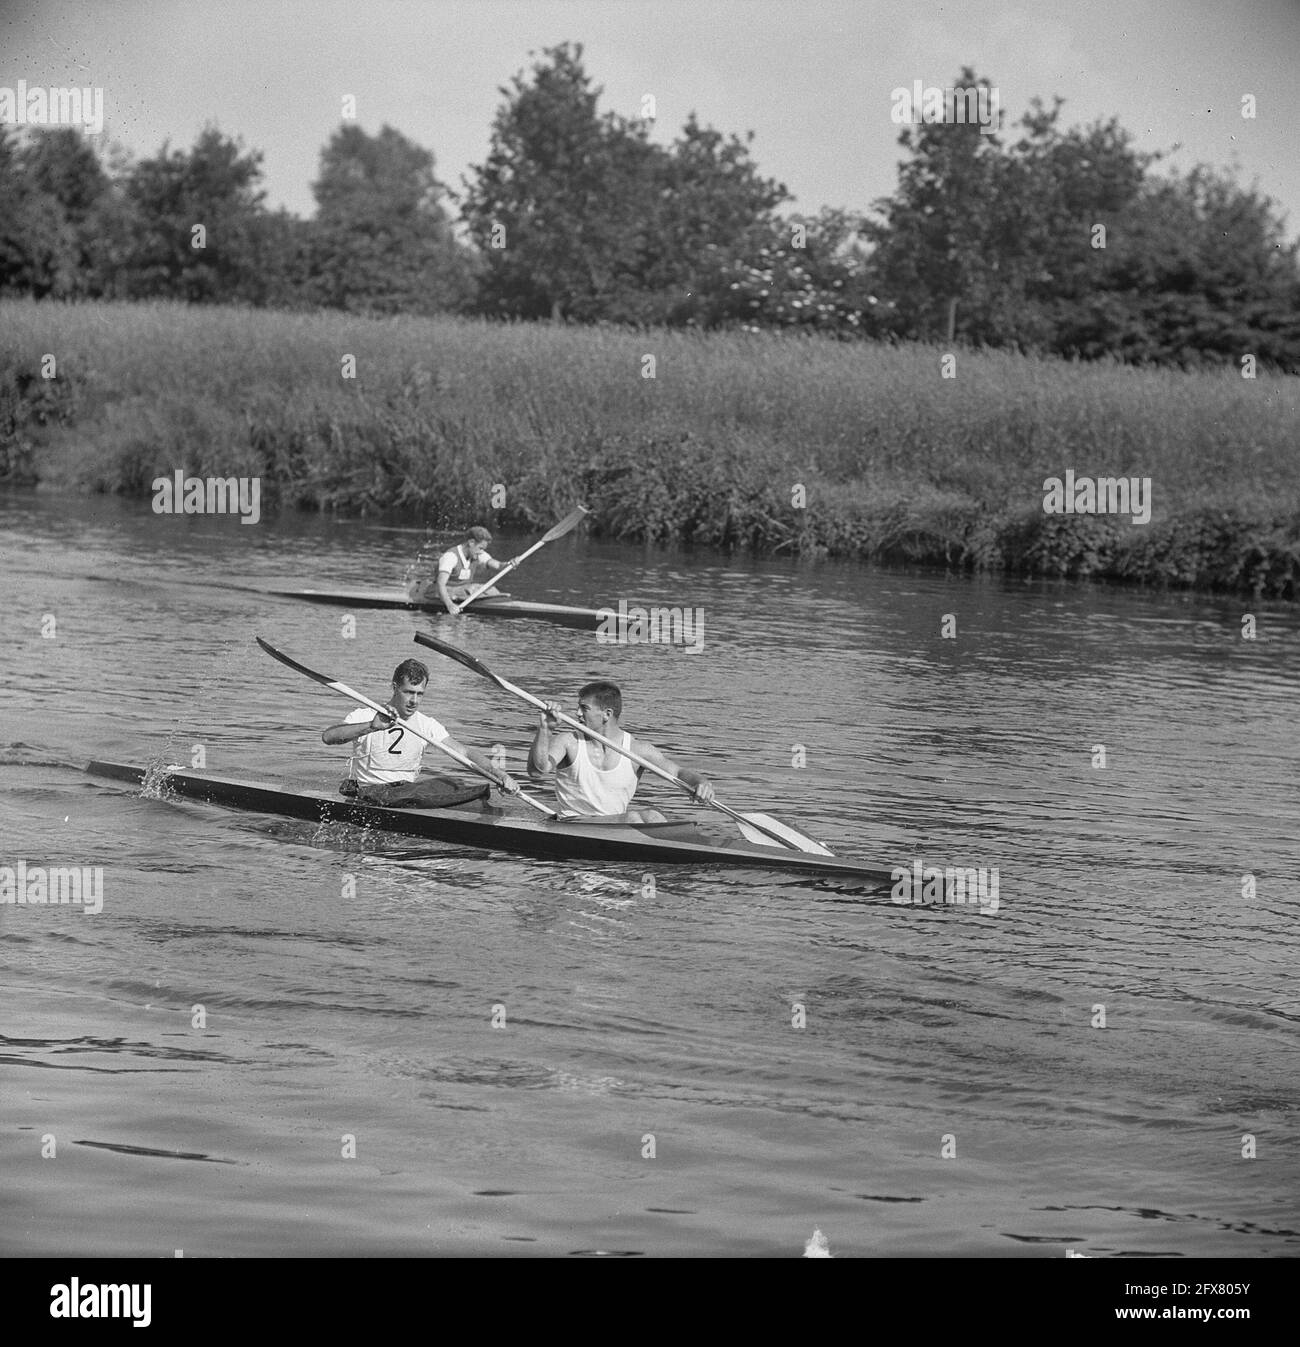 Championship of the Netherlands Canoe 10,000m Men on Twenthe Canal at Eefde. Lagrand, Kracht, Baan, van der Ster, Weyzen, Knuppe, Leeuwerik and Beunder, June 29, 1963, Championships, canoers, The Netherlands, 20th century press agency photo, news to remember, documentary, historic photography 1945-1990, visual stories, human history of the Twentieth Century, capturing moments in time Stock Photo